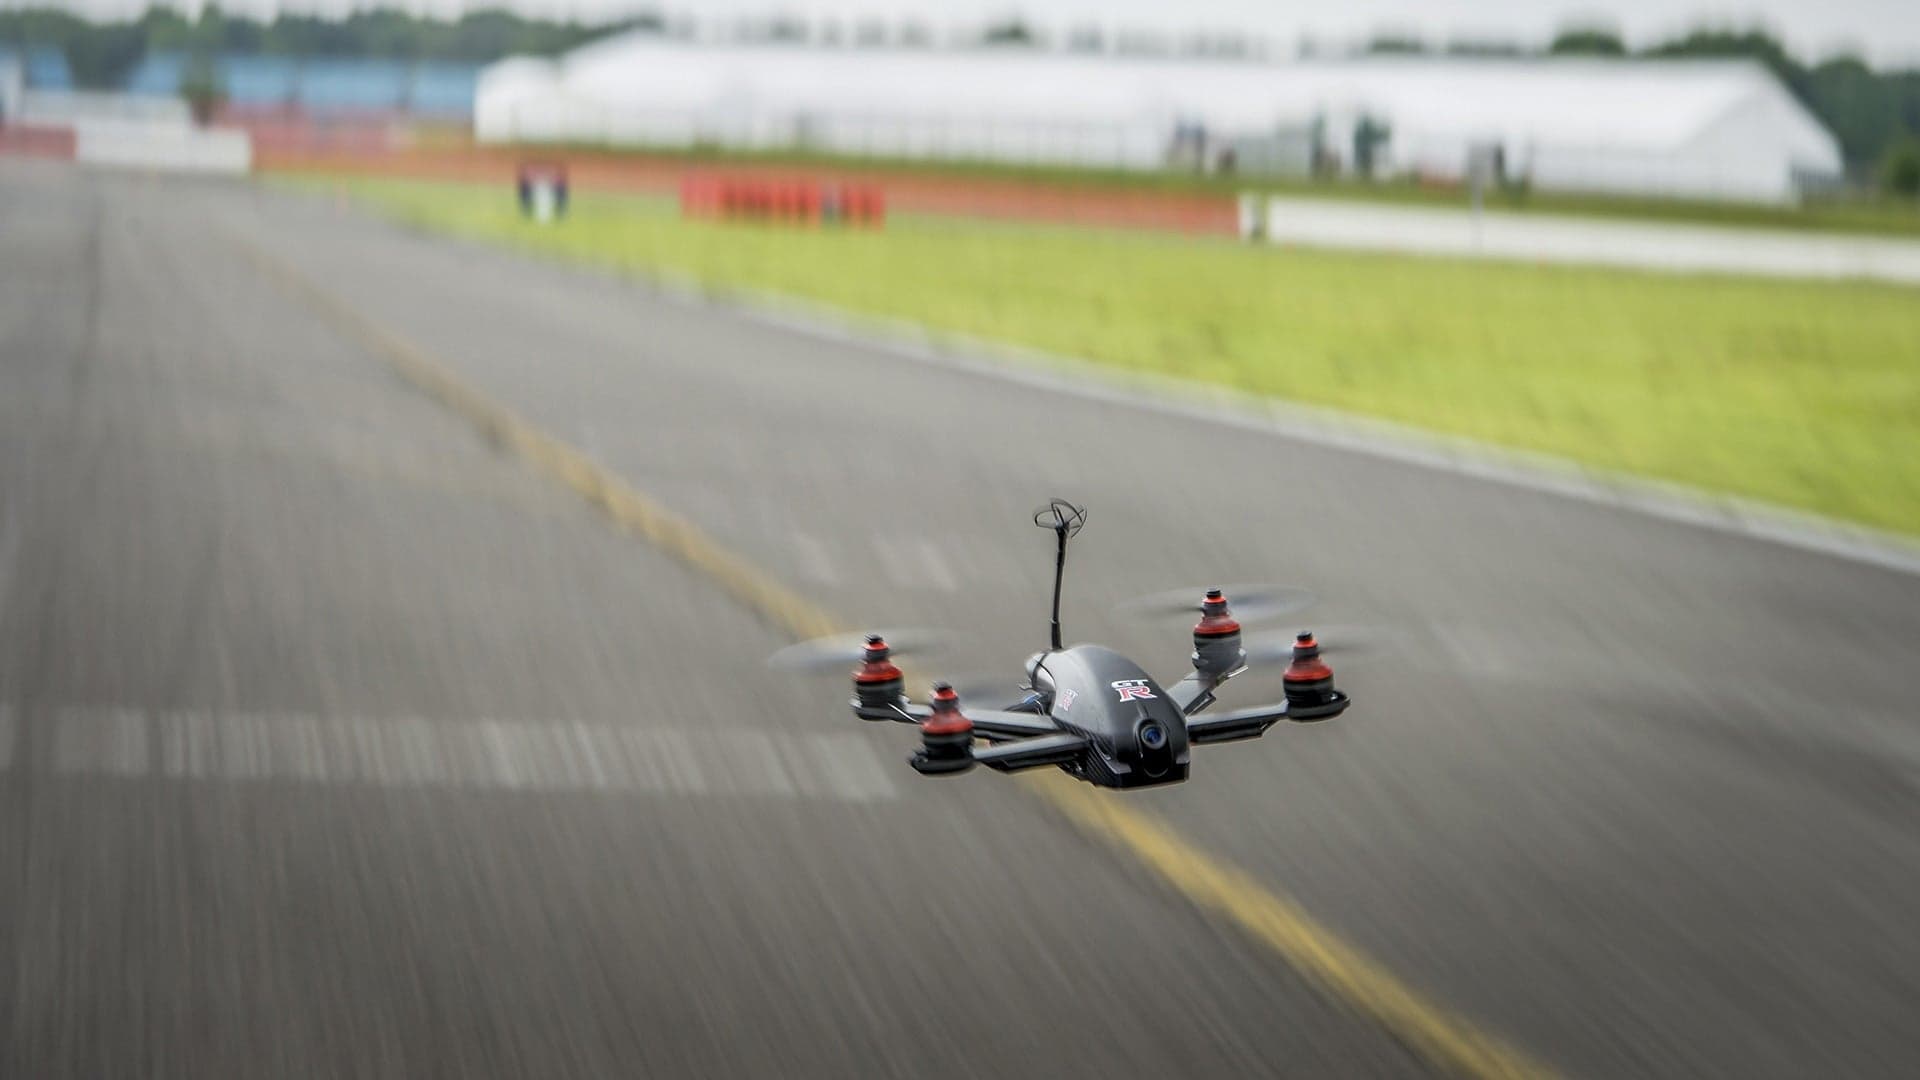 Nissan Made a GT-R Drone That Does 0 to 60 in 1.3 Seconds